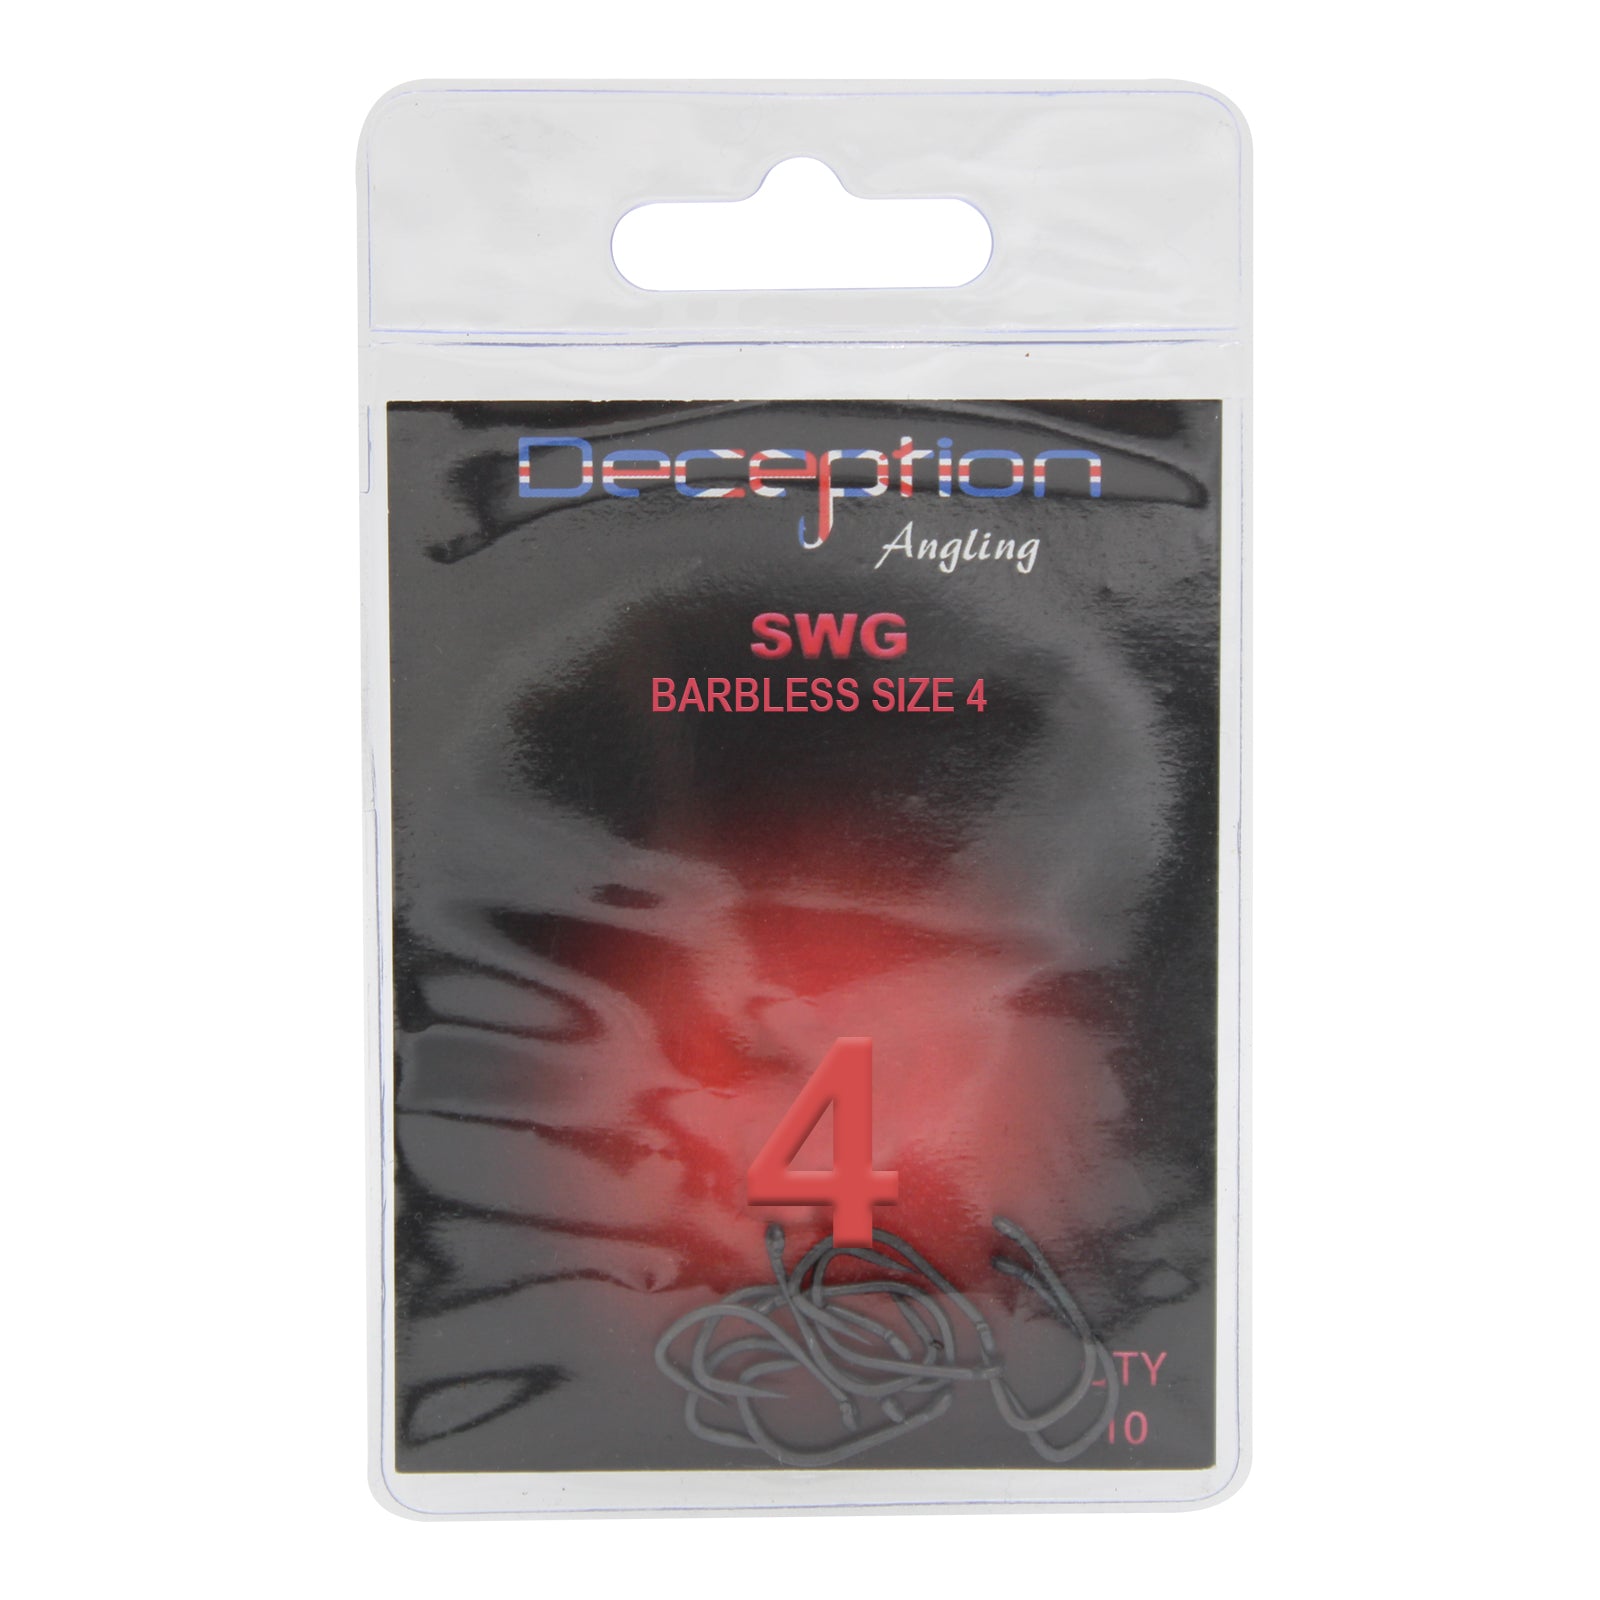 Deception Angling SWG Barbless Hooks Size 4 Pack of 10